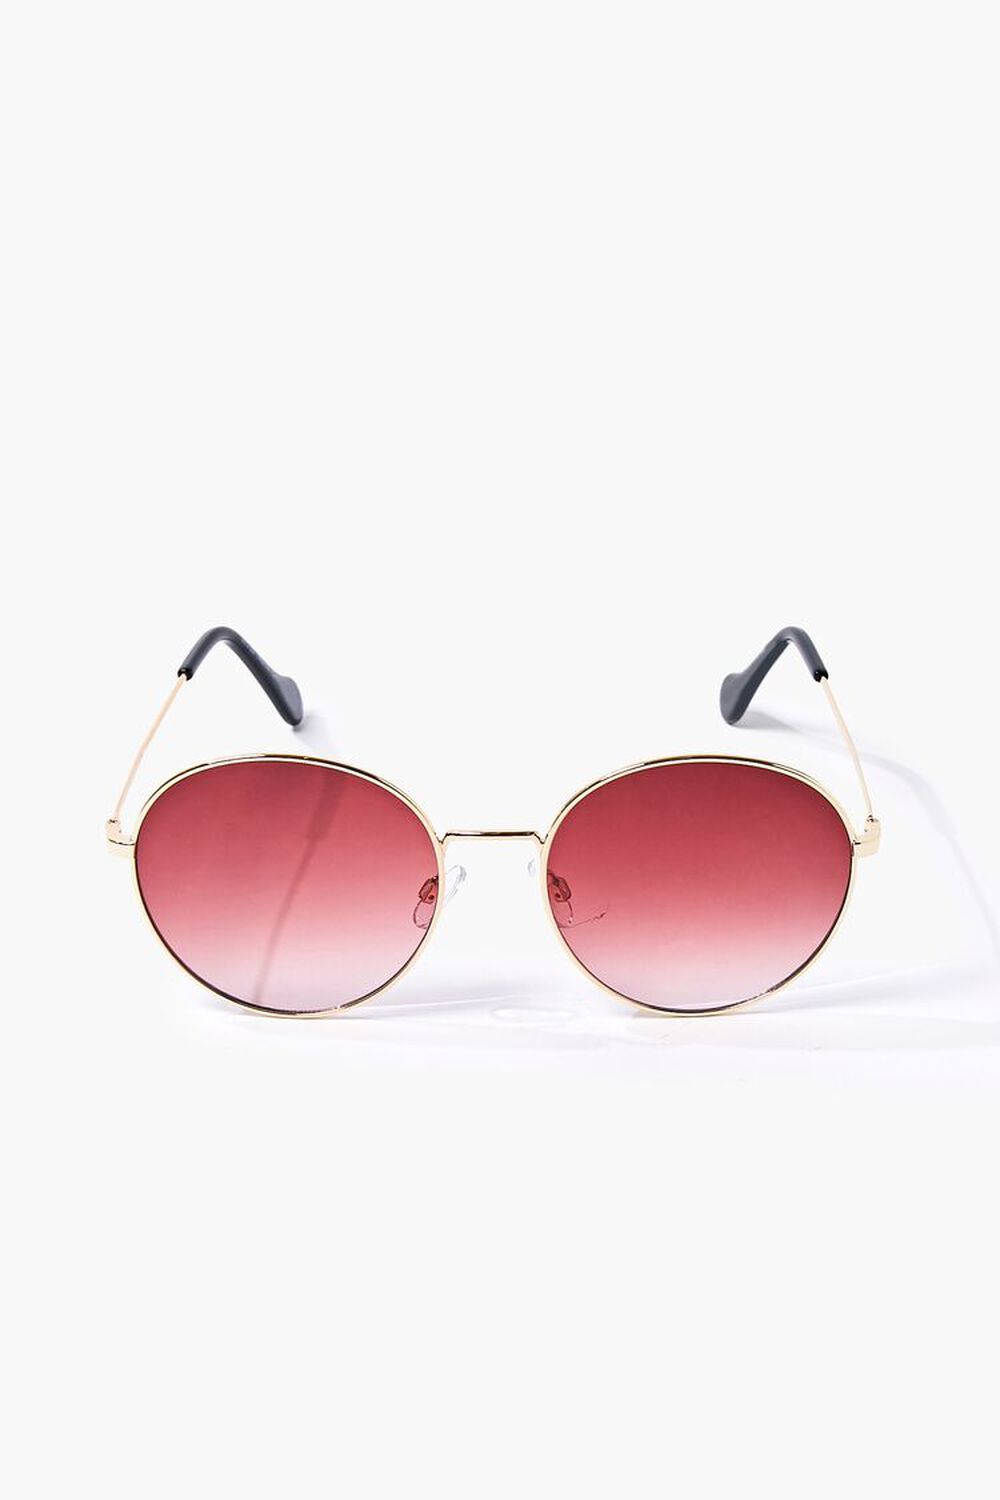 GOLD/RUST Round Ombre Metal Sunglasses, image 1